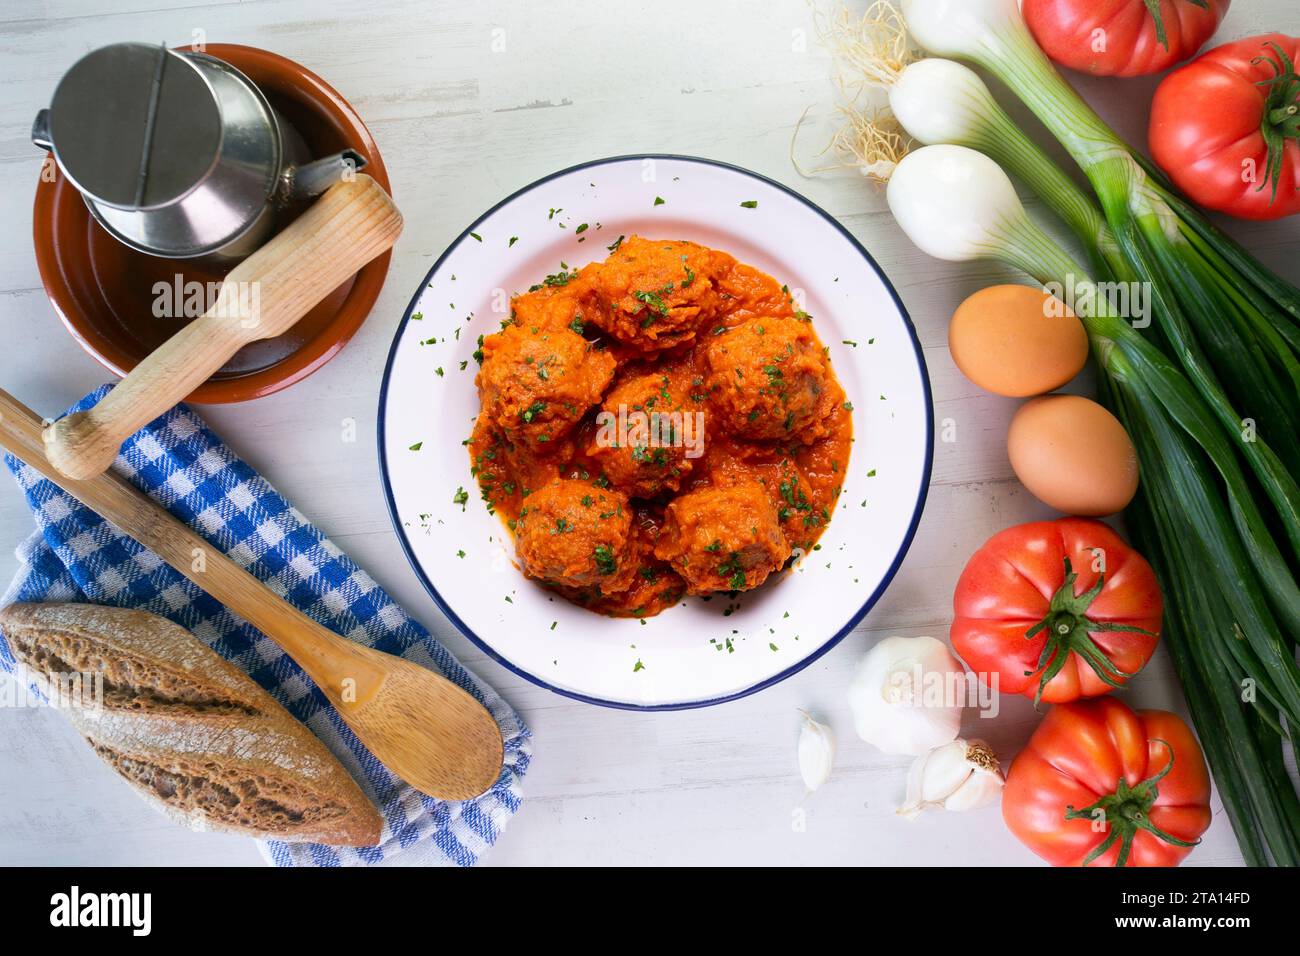 Meat meatballs with tomato sauce and vegetables. Traditional Spanish tapa recipe. Stock Photo